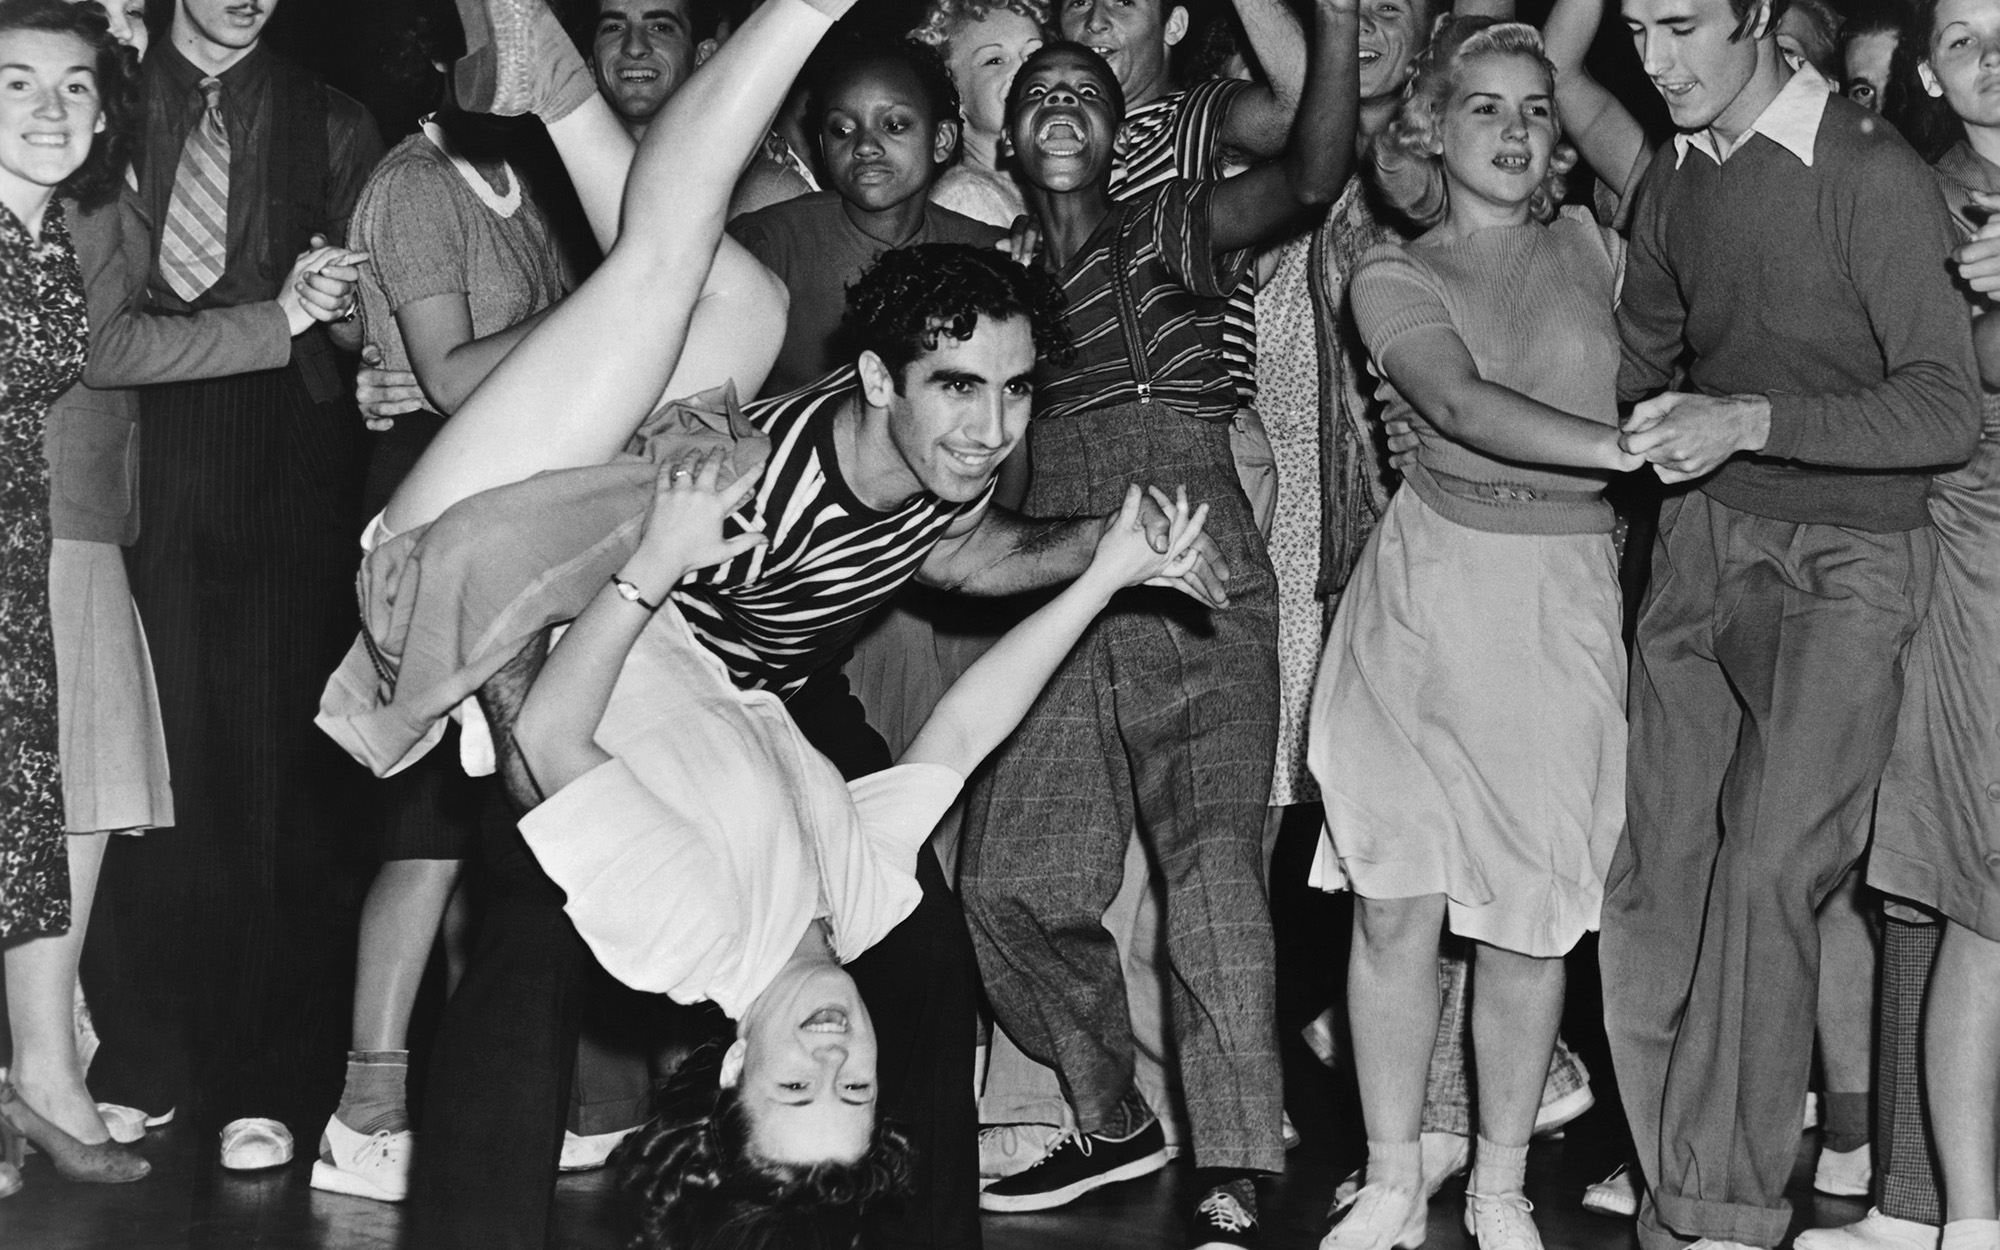 santa-cruz-had-a-footloose-moment-in-1956-when-rock-and-roll-dances-were-banned-Z6puYI.jpg (2000×1250)